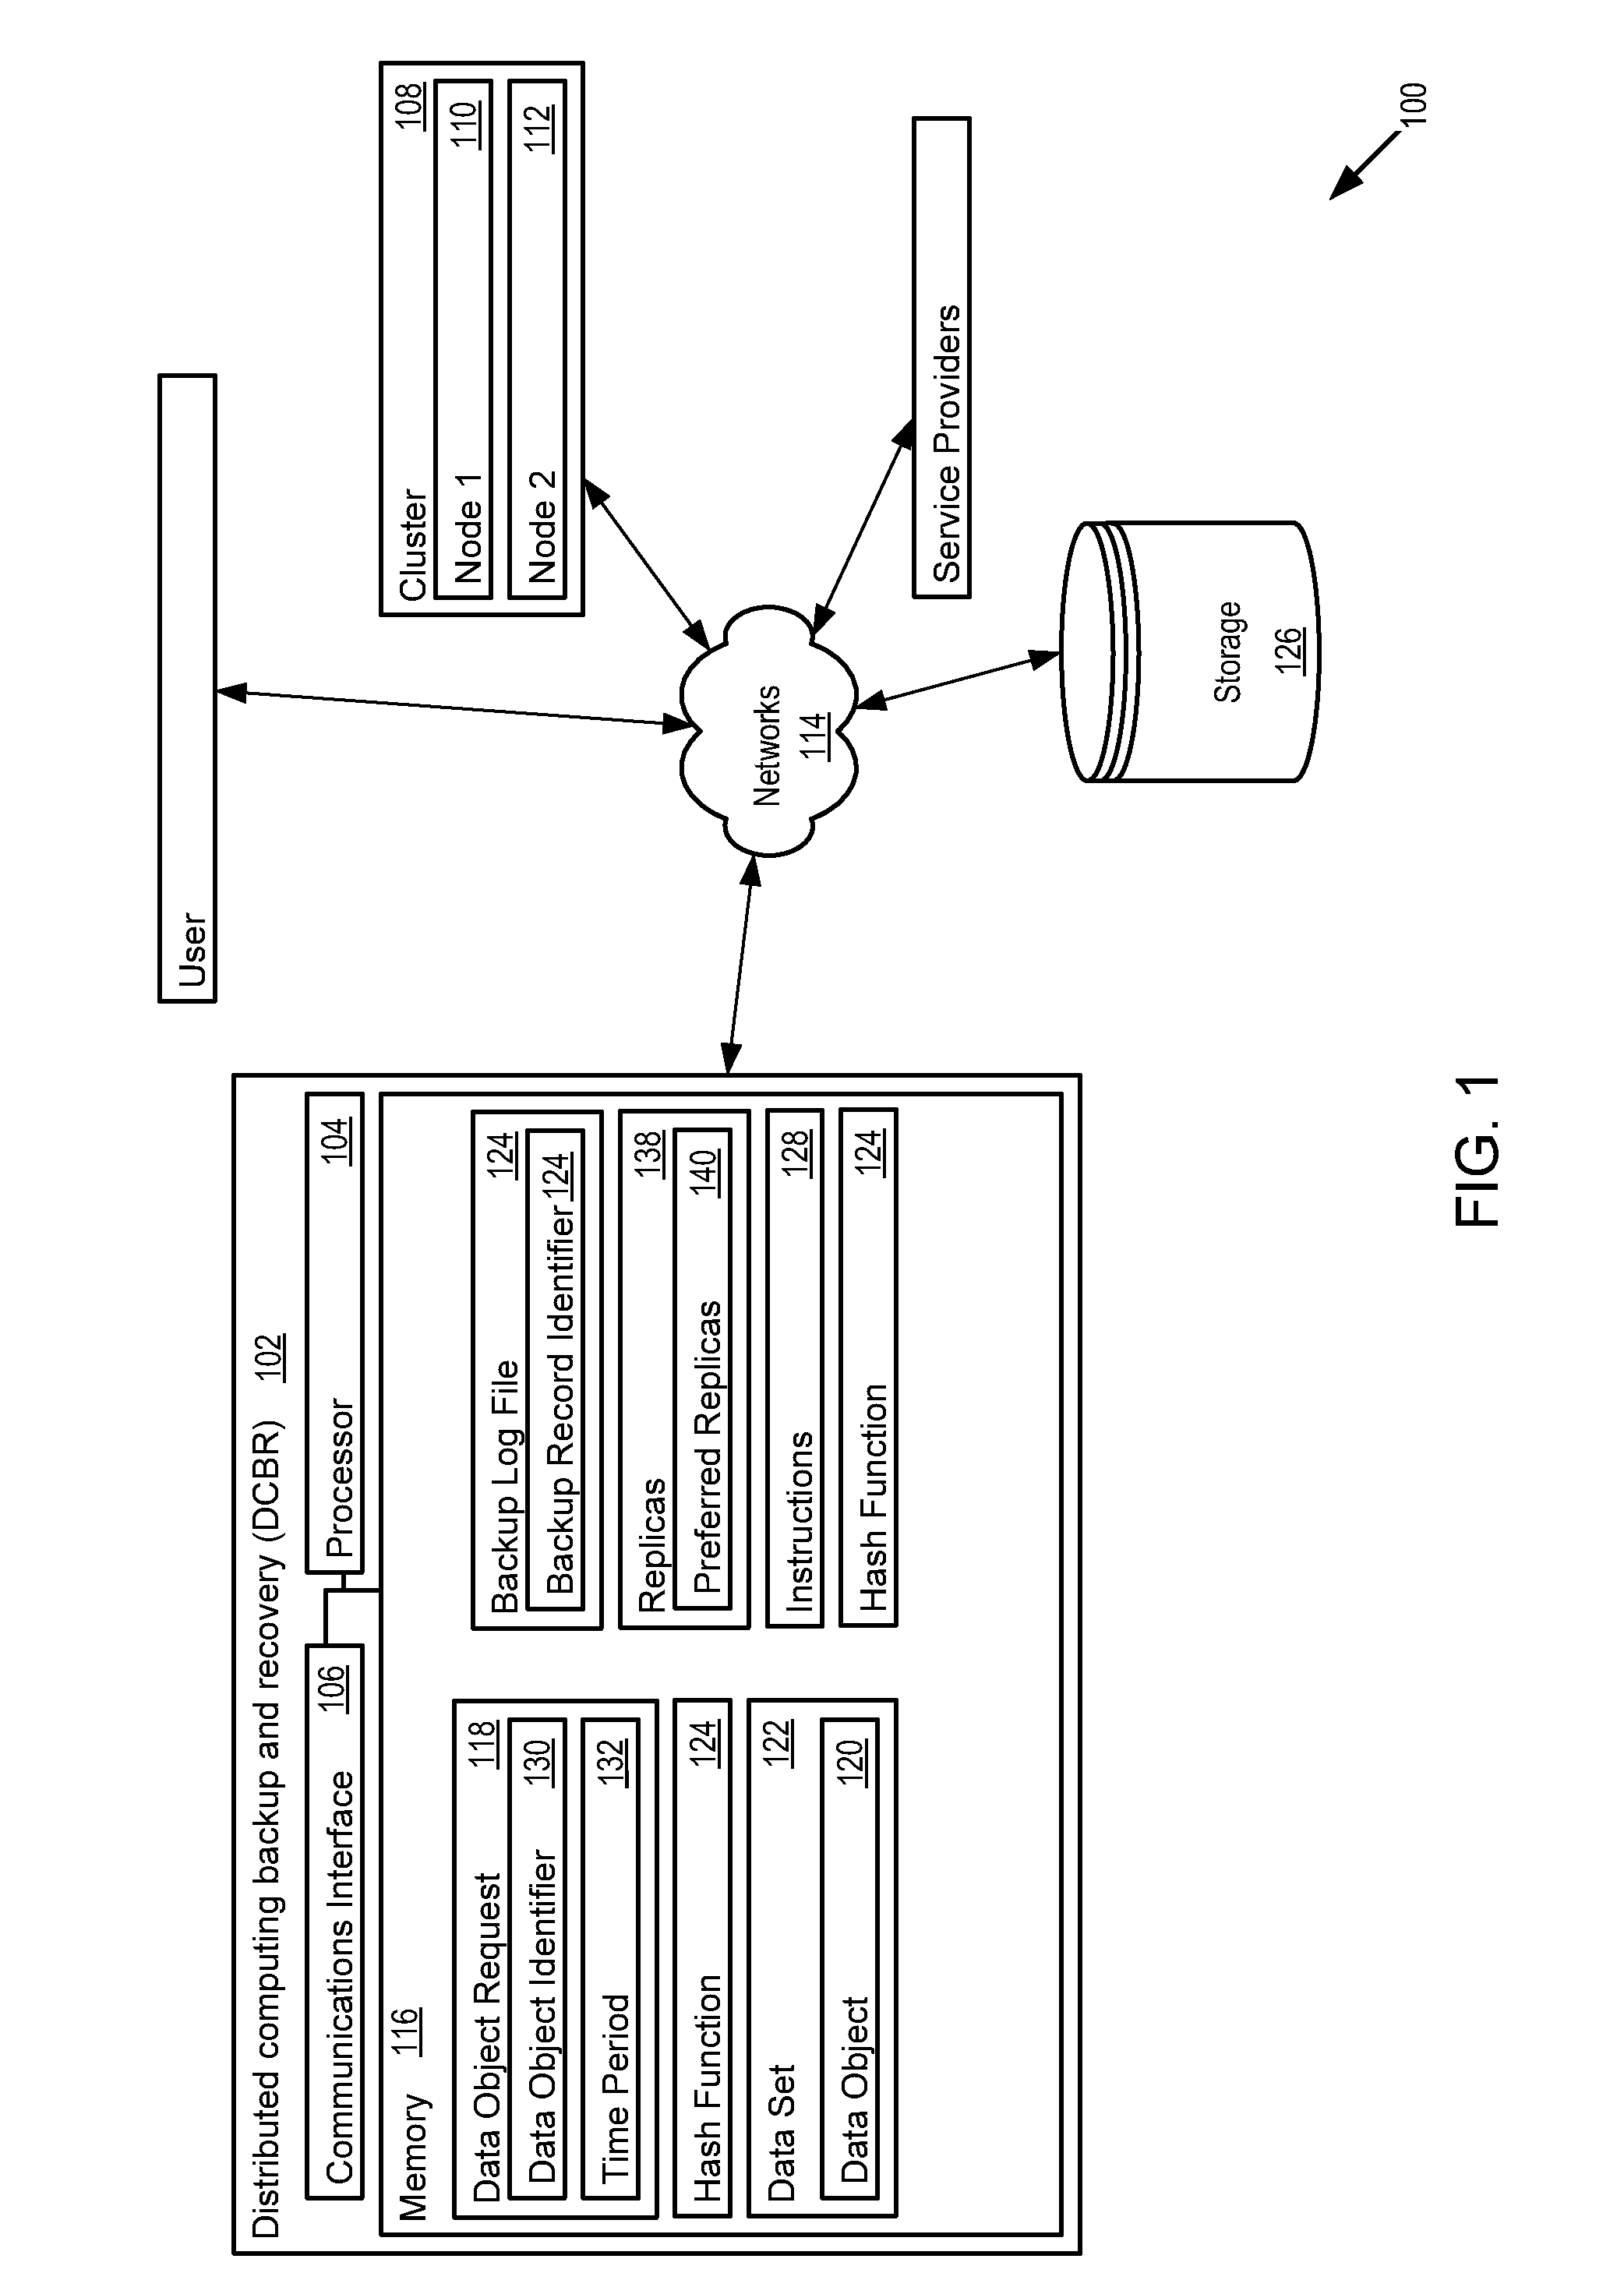 Distributed computing backup and recovery system